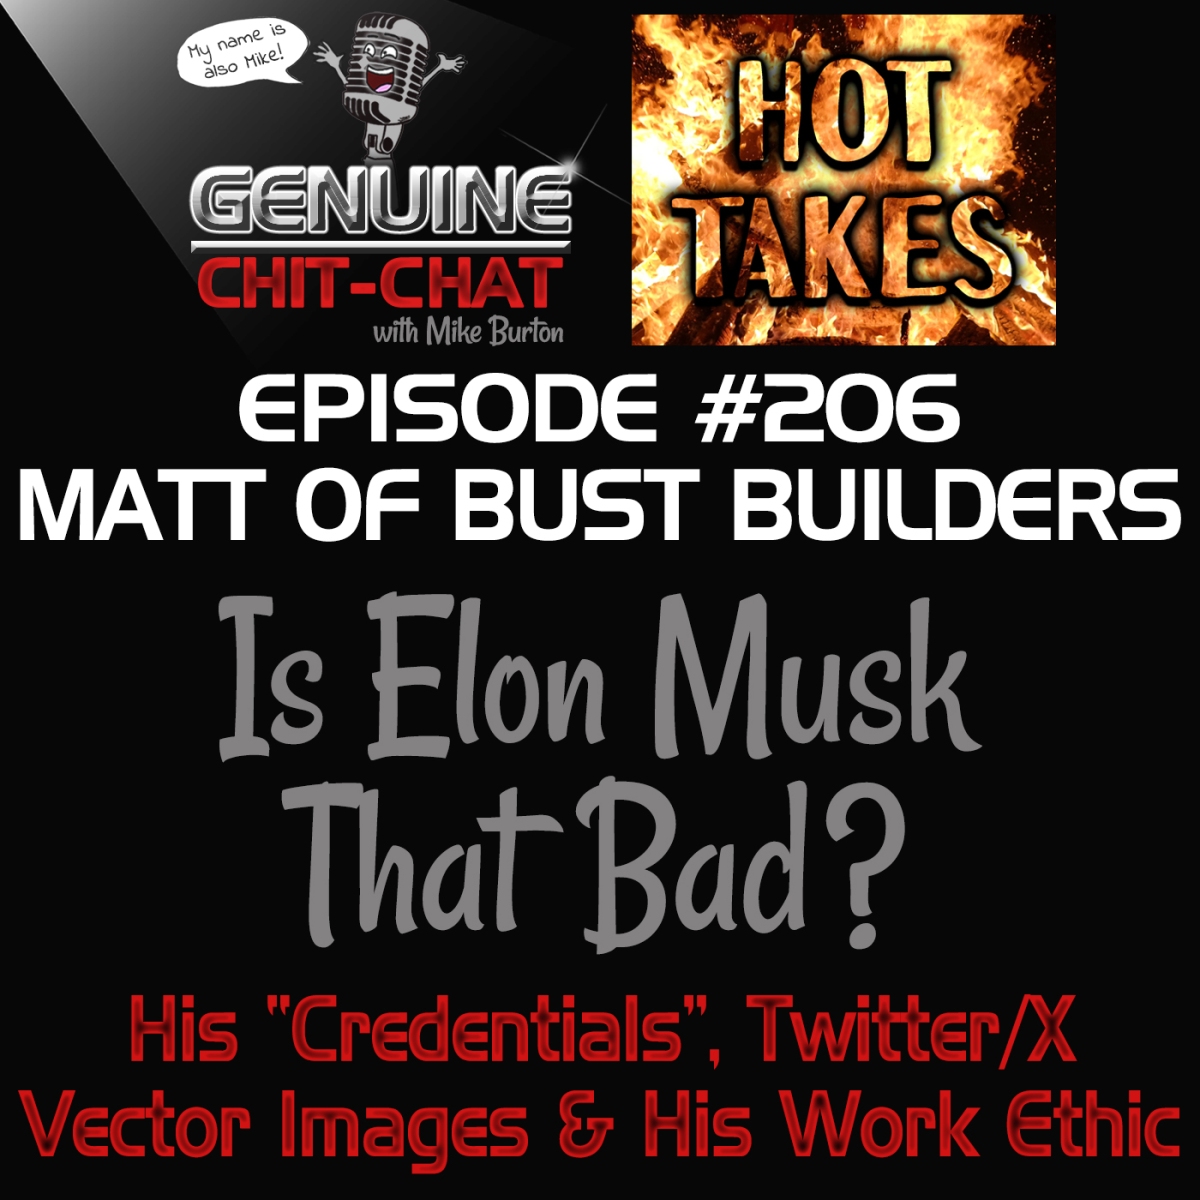 #206 Pt 1 – Hot Takes: Is Elon Musk That Bad? His “Credentials”, Twitter, X, Vector Images & His Work Ethic With Matt of Bust Builders